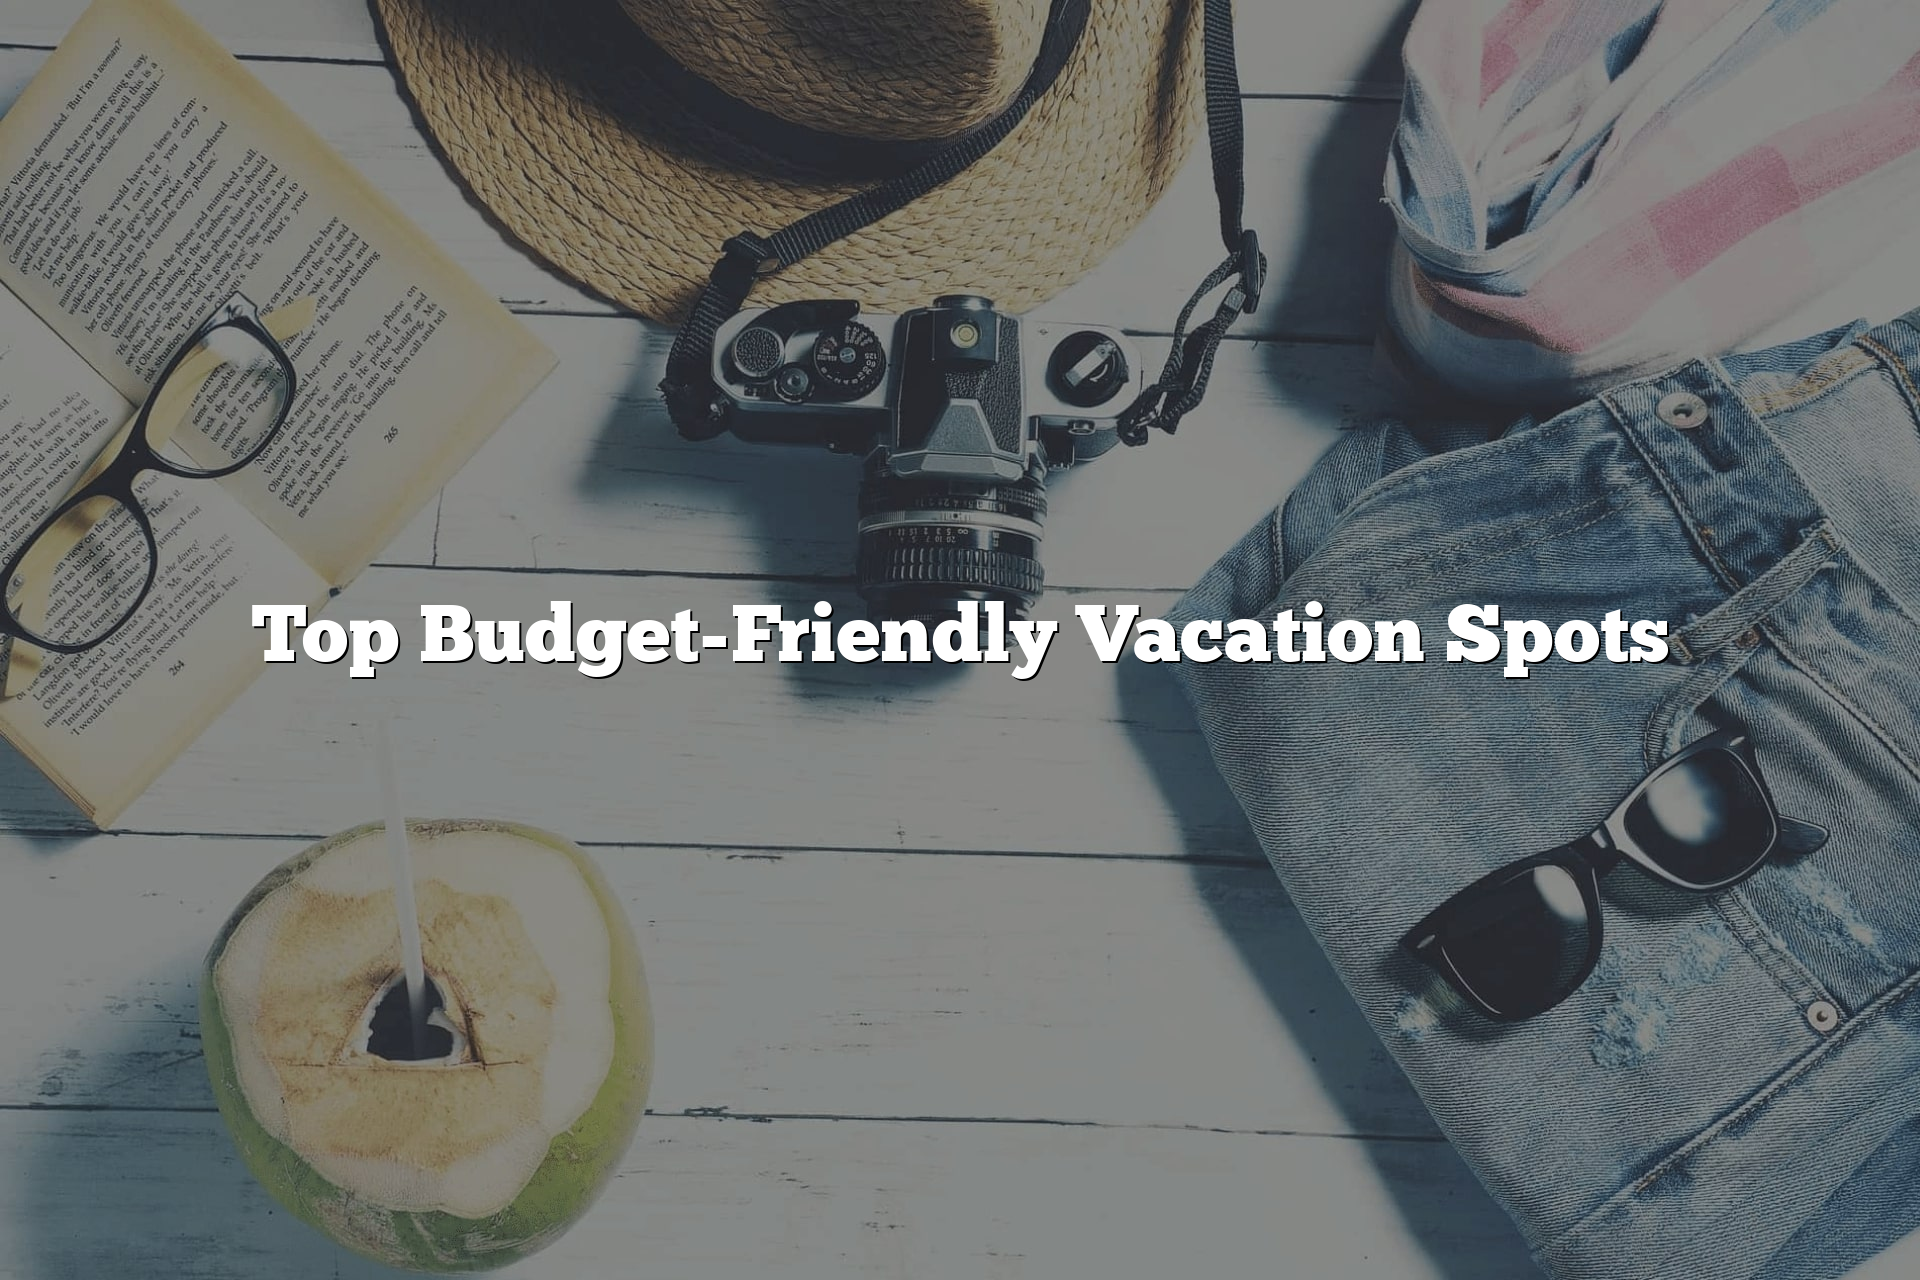 Top Budget-Friendly Vacation Spots